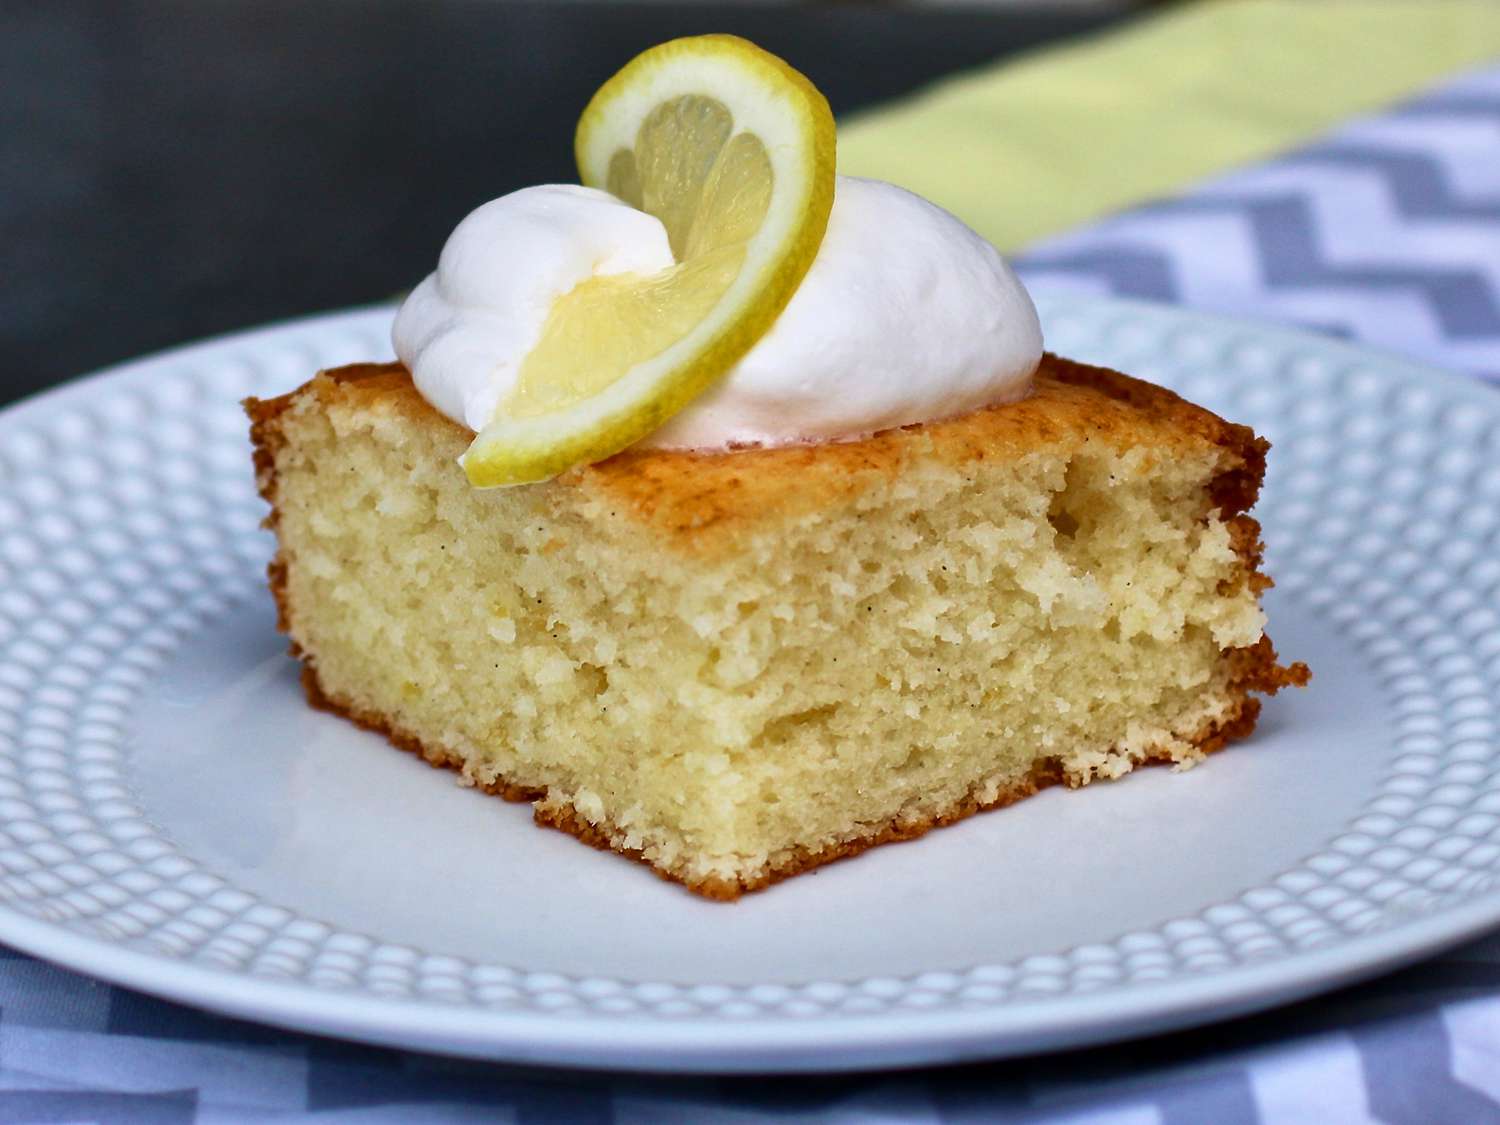 close up view of a slice of Simple Lemon Cake garnished with whipped cream and a slice of lemon on a white plate